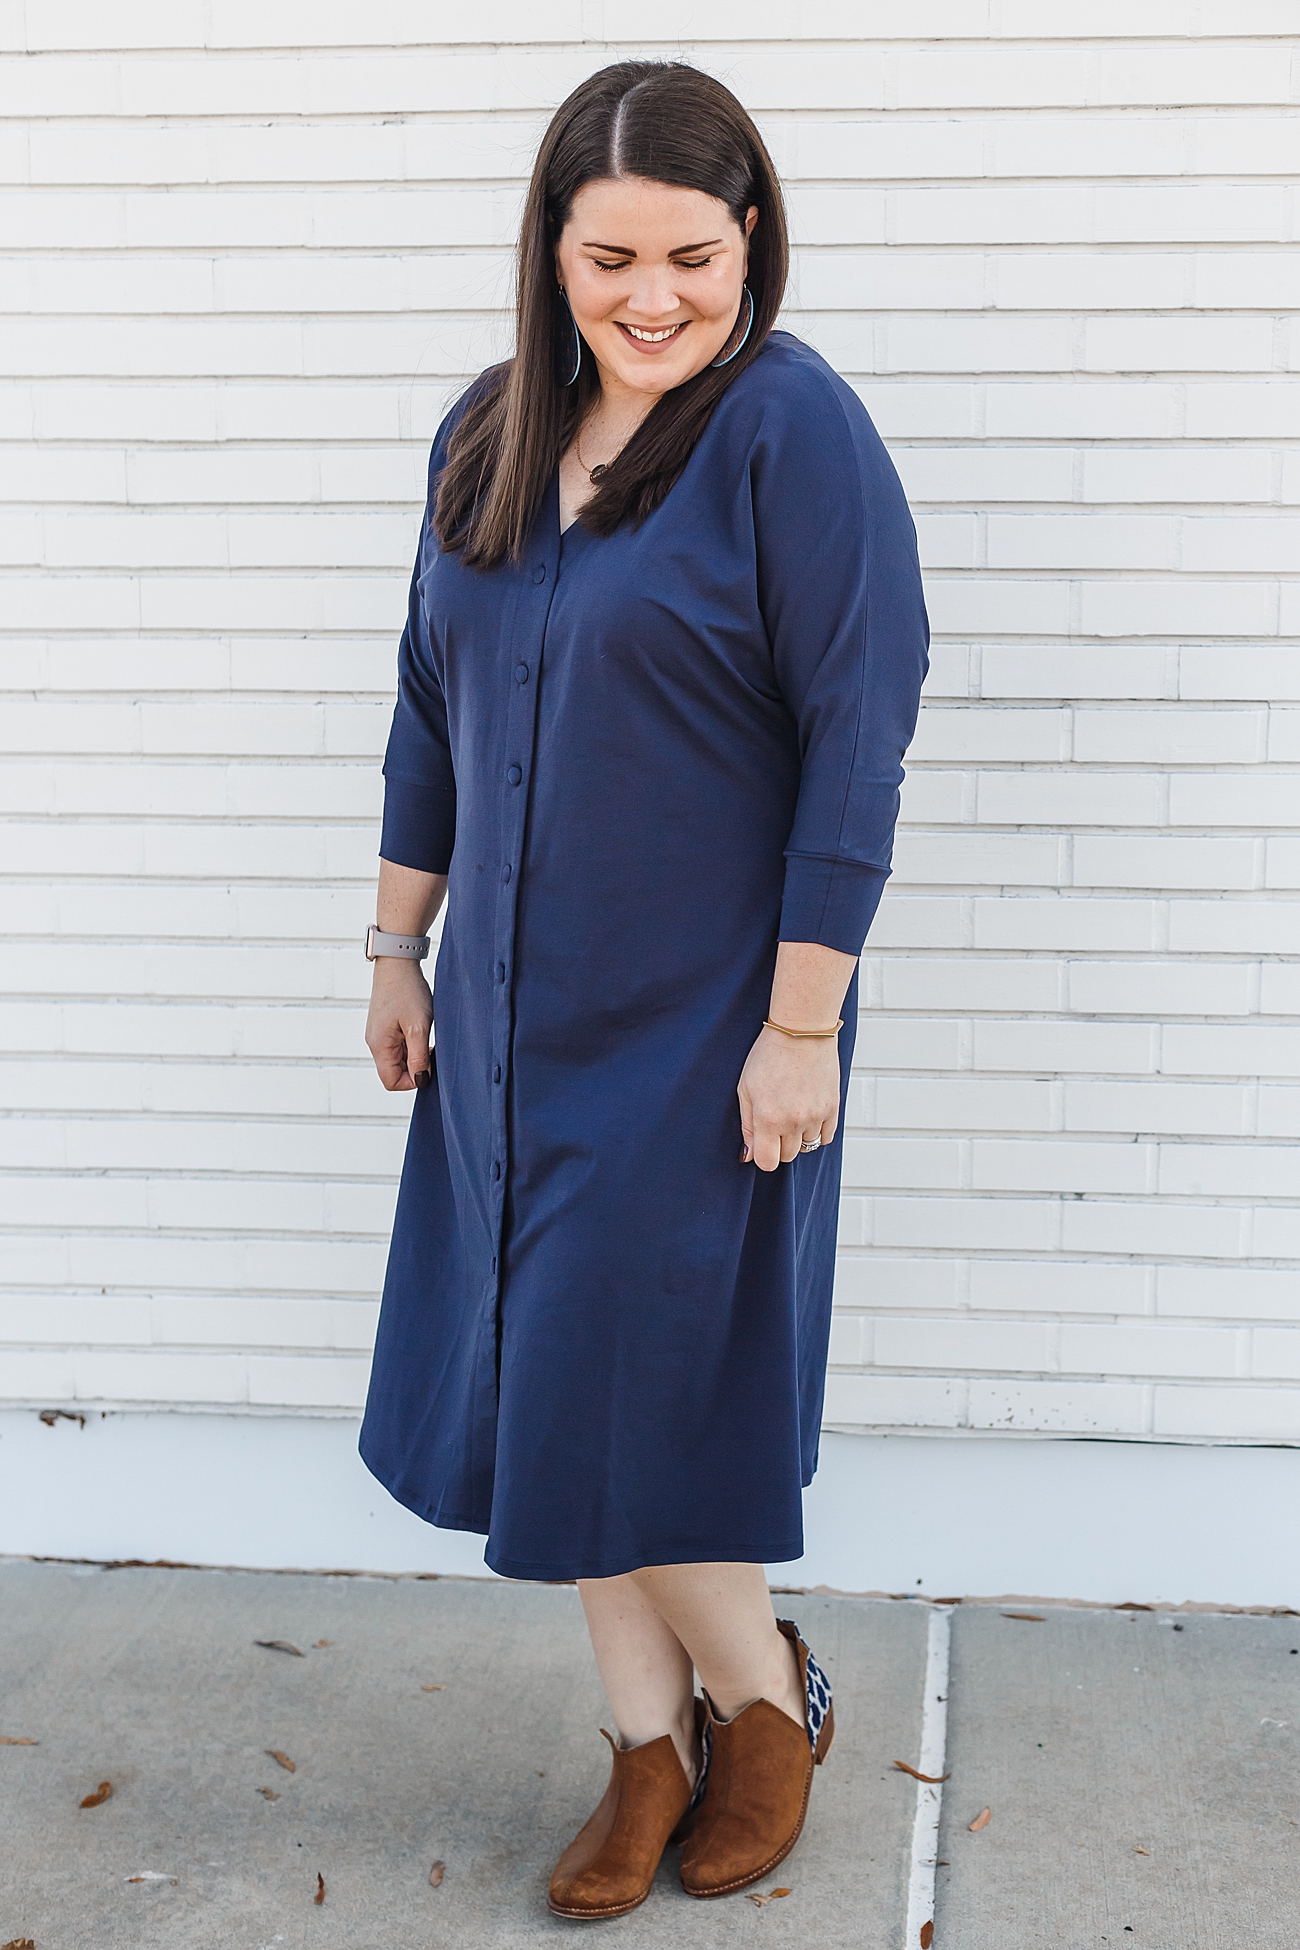 The Elegantees "Molly" Dress is Here! | Beautiful, versatile, ethically made dress (17)